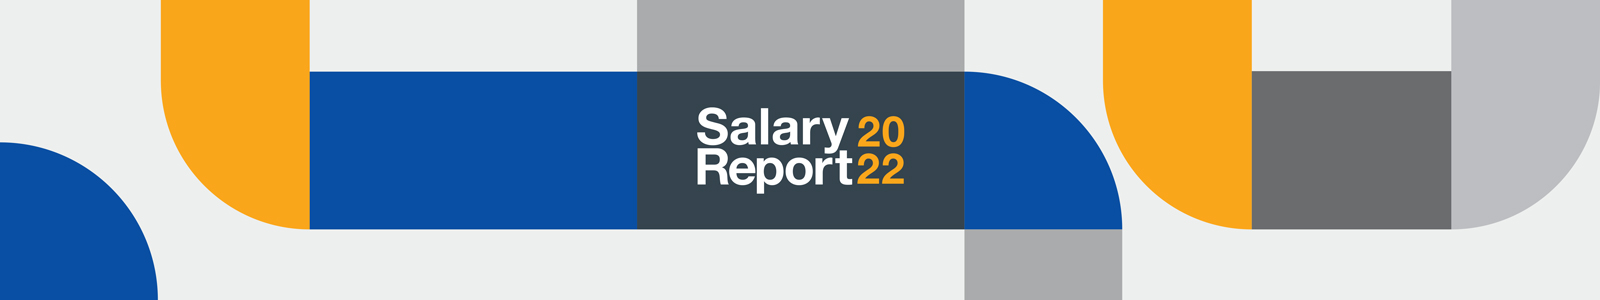 Salary Report 2022 - Landing Page Banner